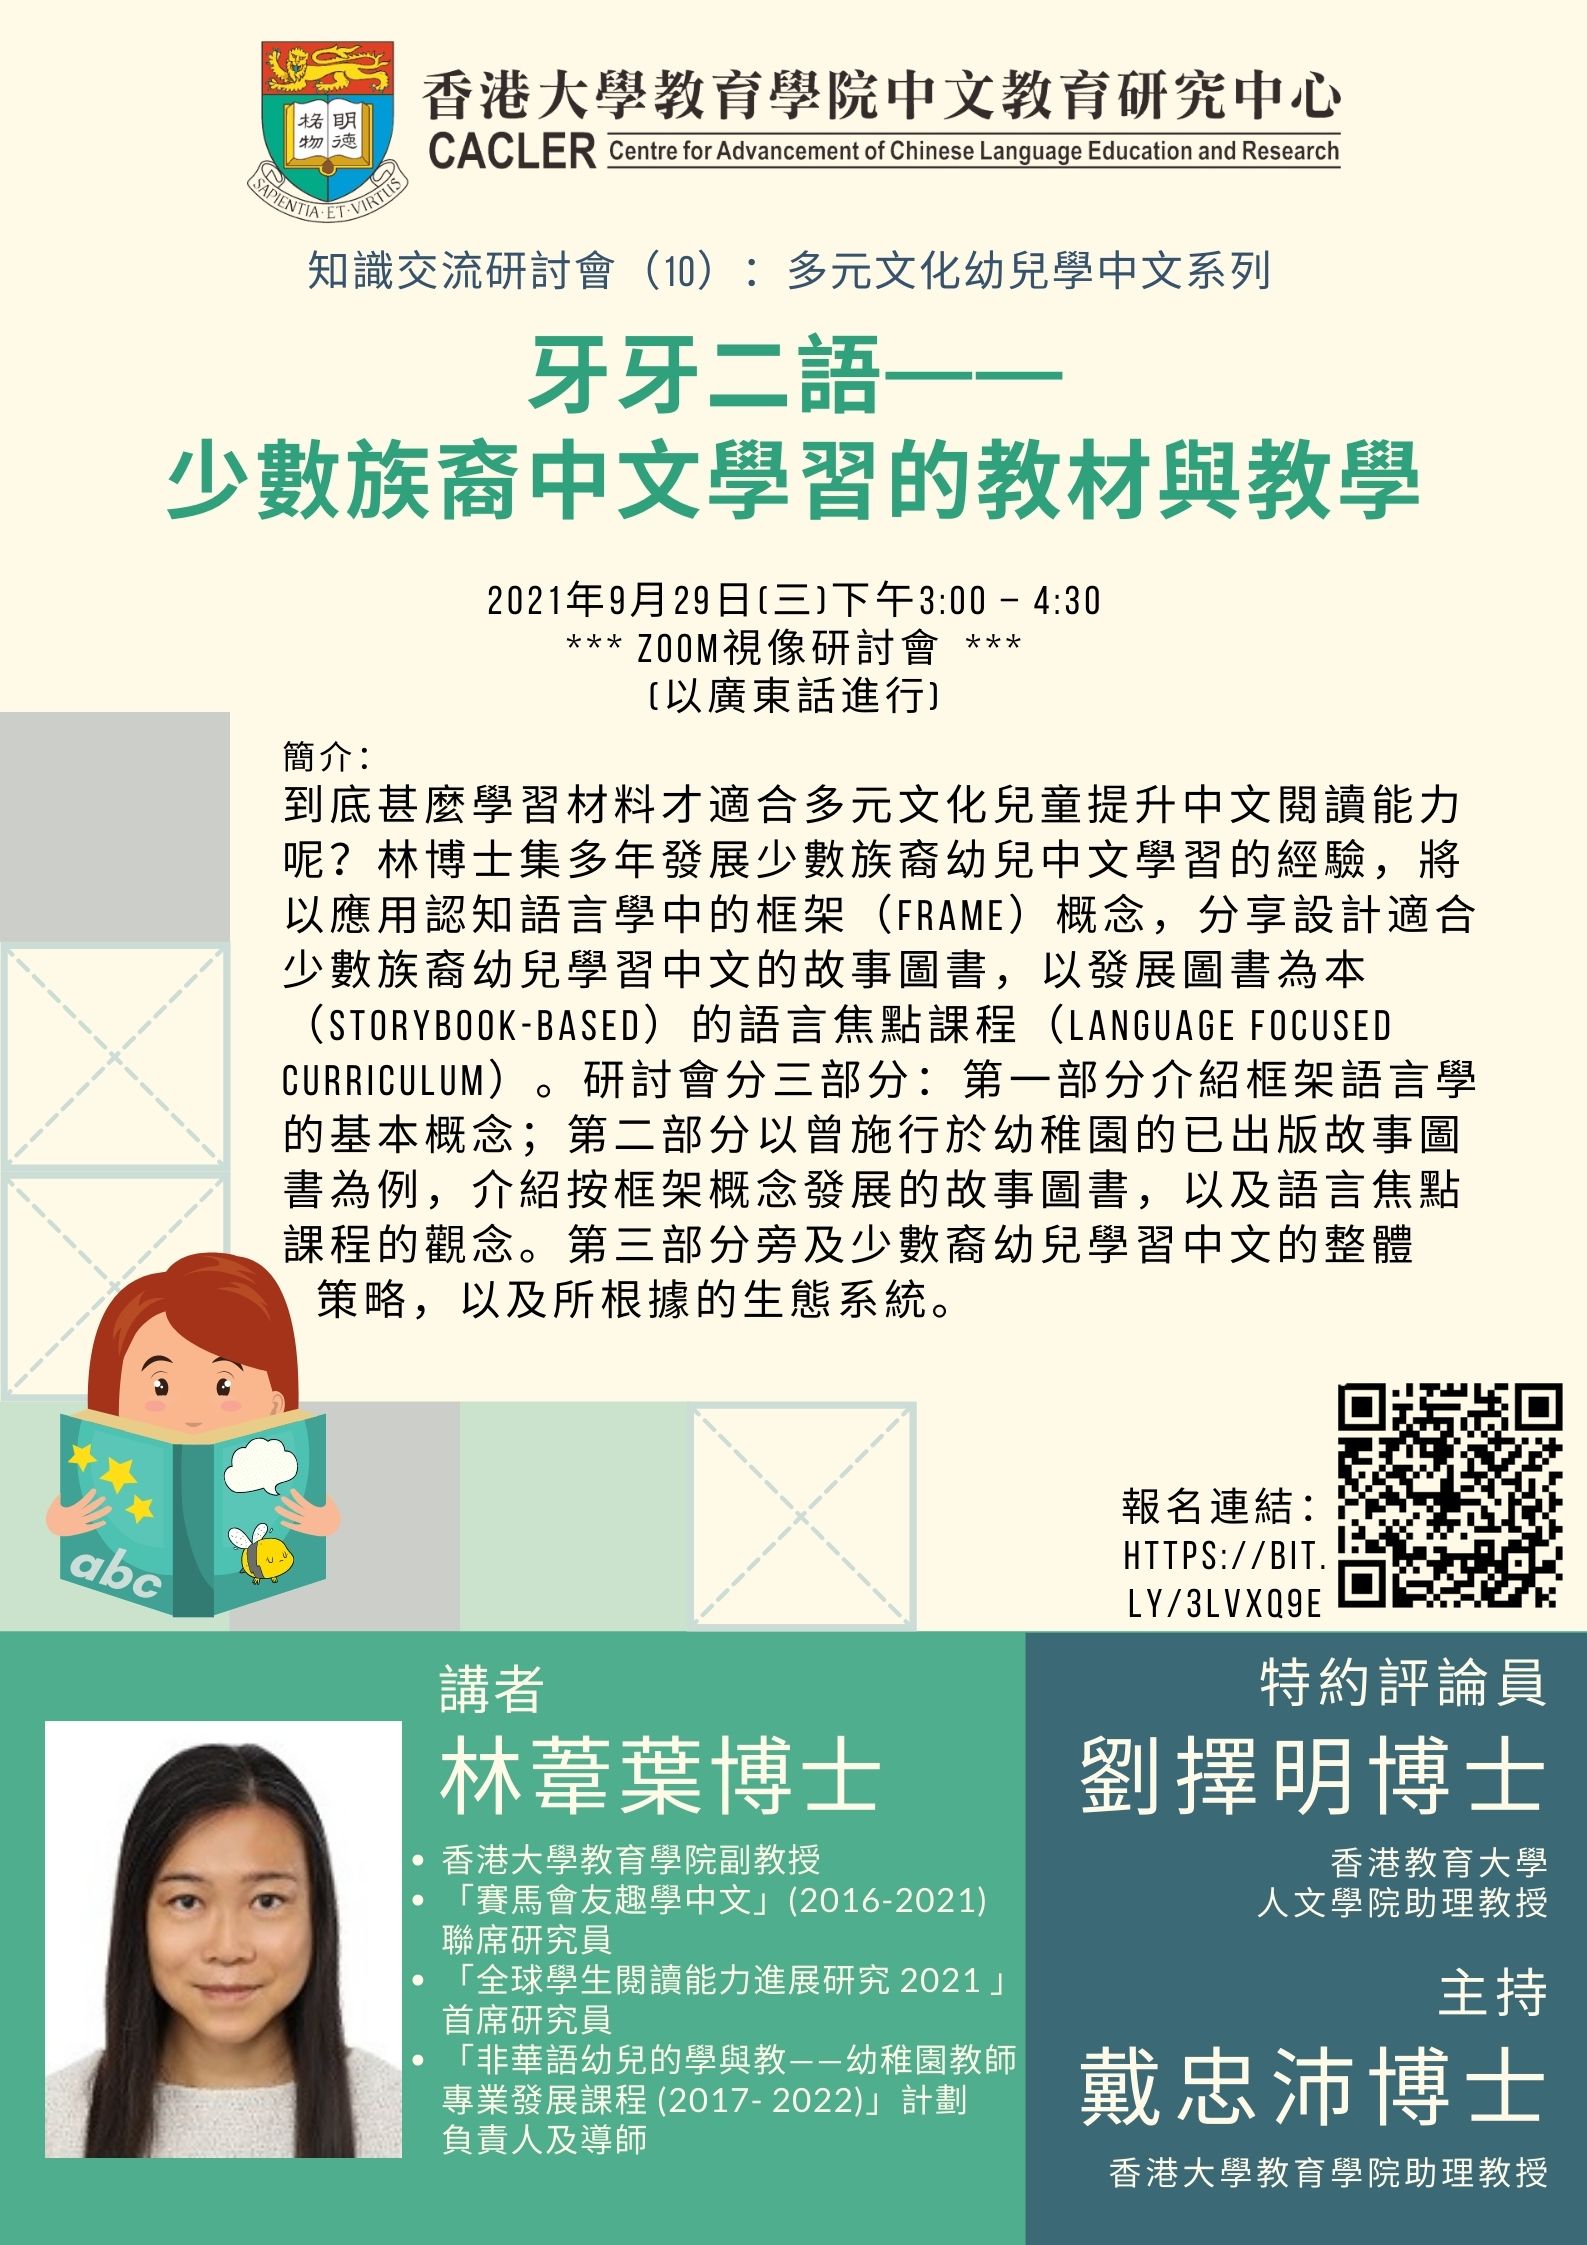 Knowledge Exchange Forum (10) Series of Multicultural Early Childhood Chinese Education : Teaching Materials and Pedagogies for EM Preschoolers Learning Chinese title